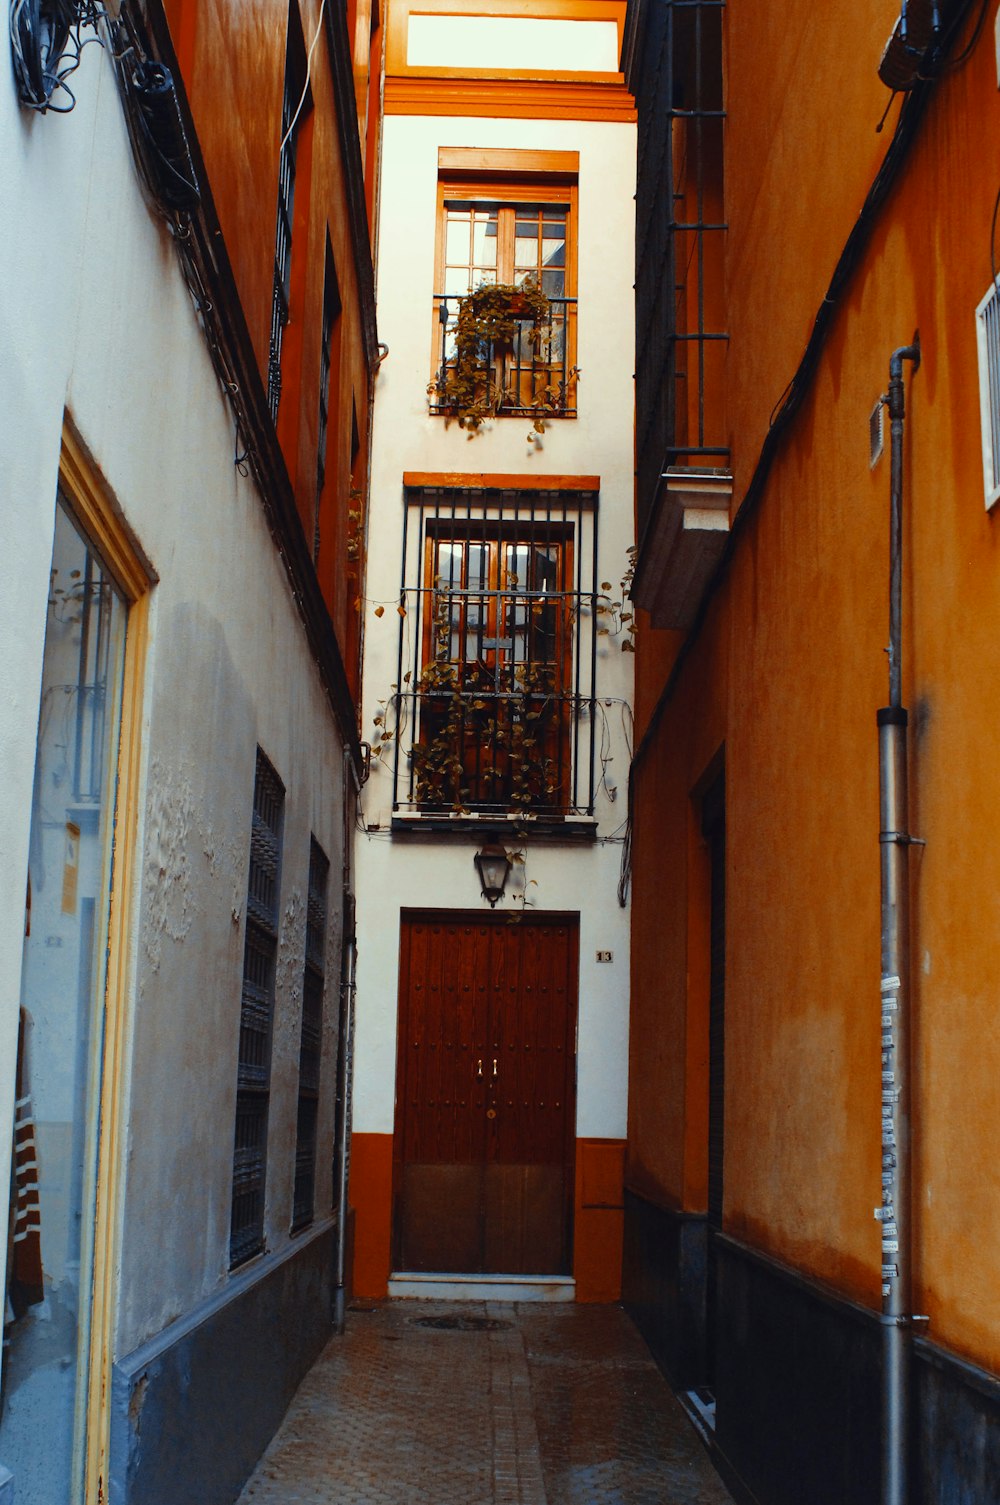 a narrow alley way with a door and a window